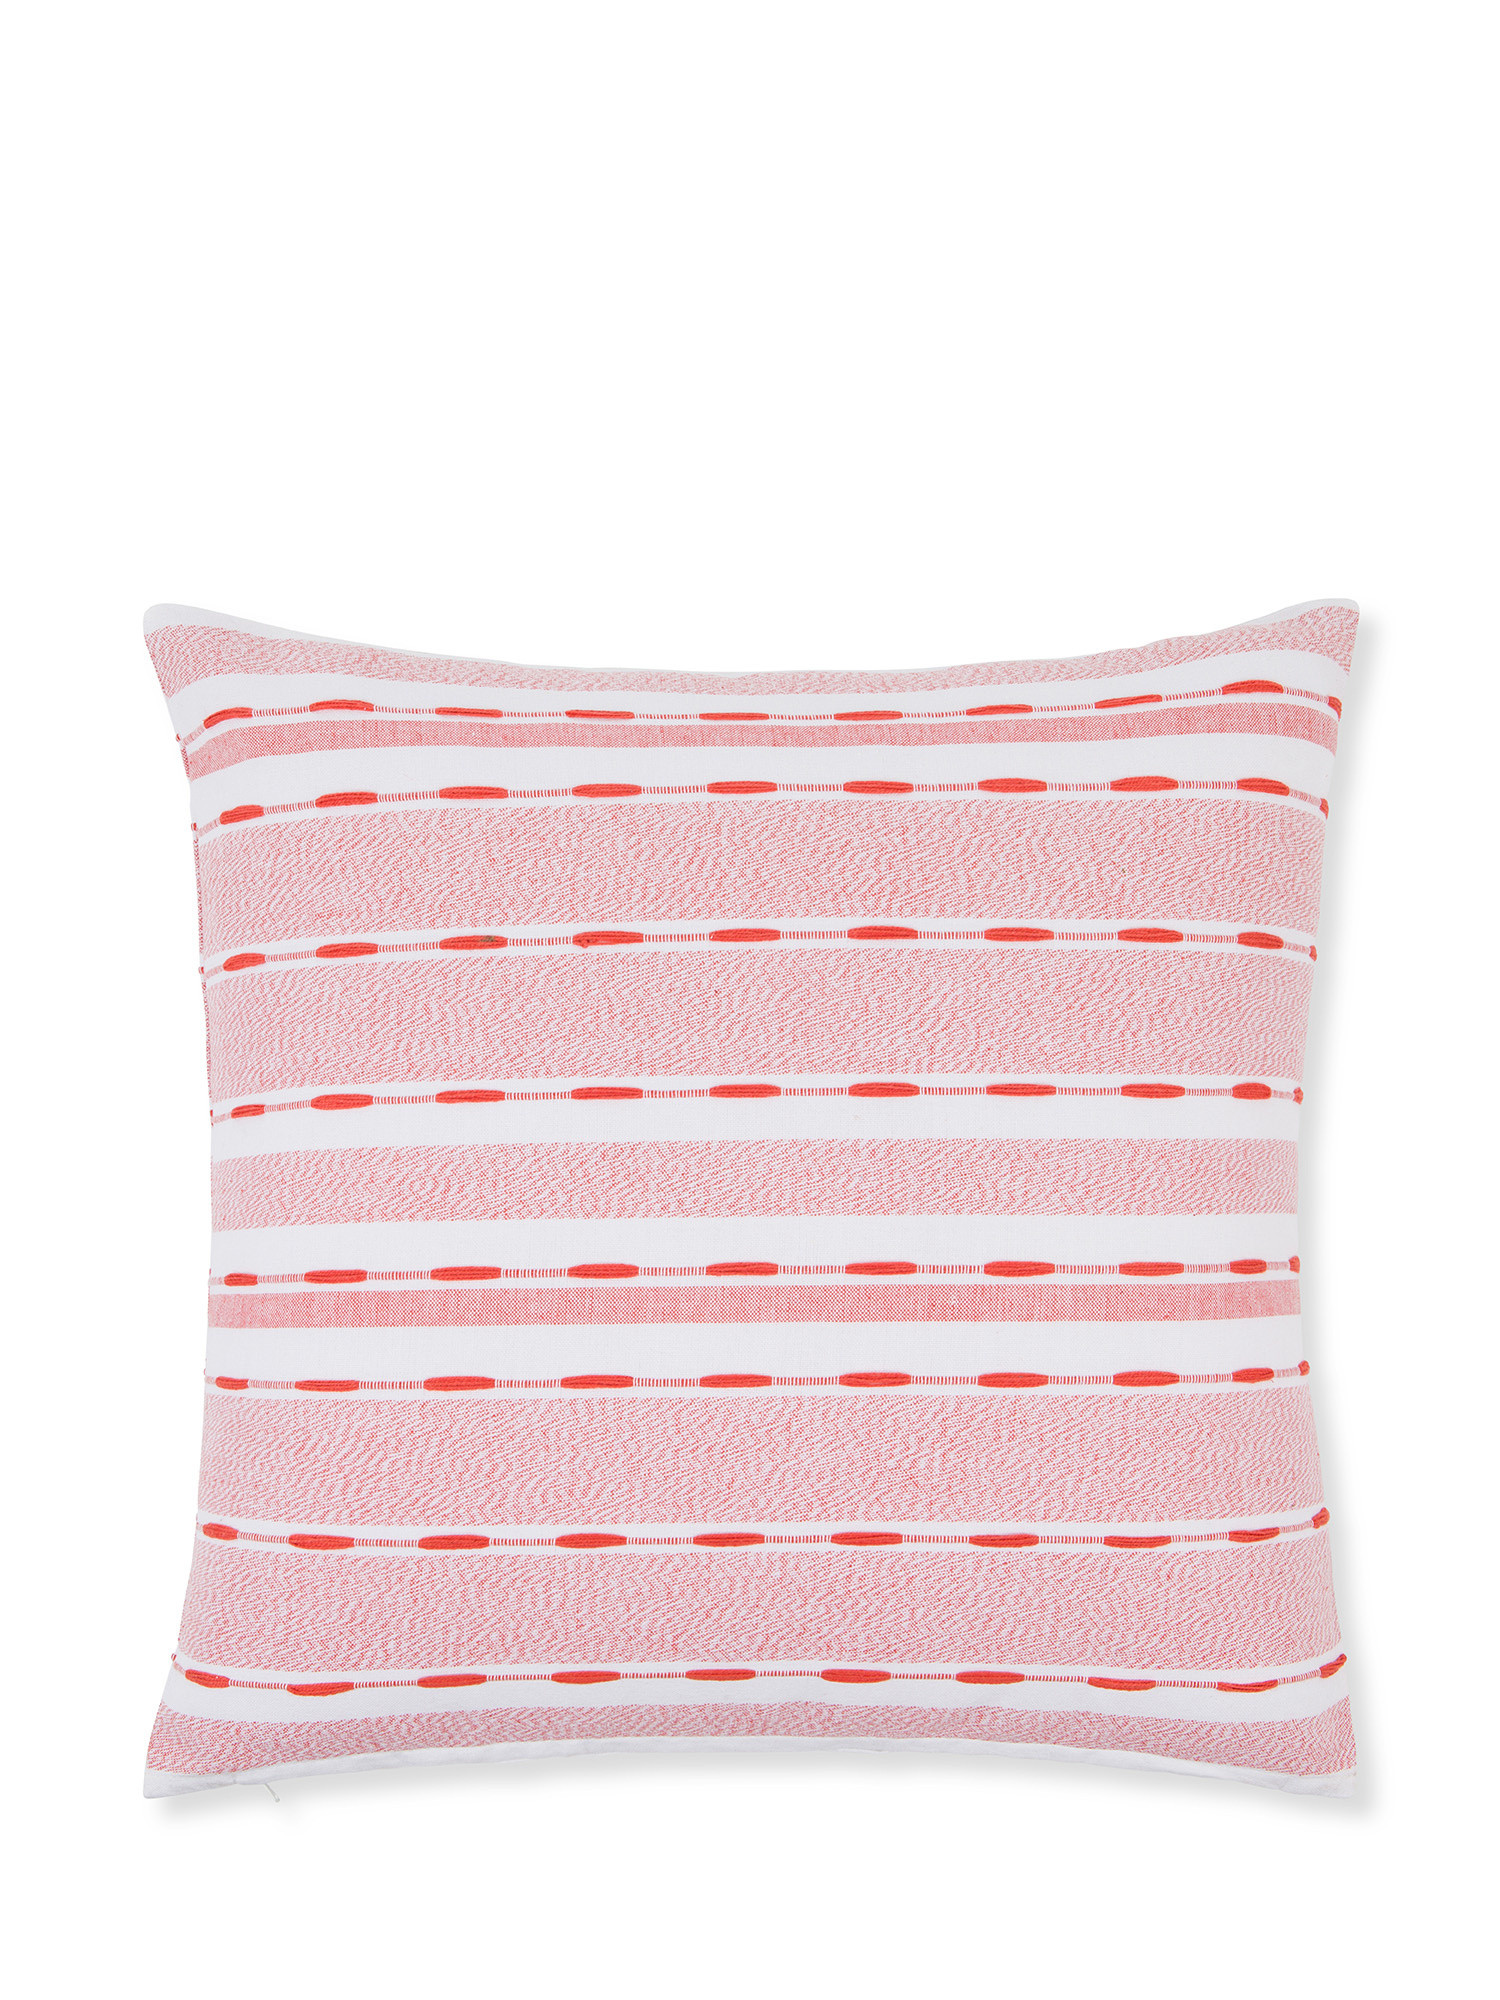 Cushion with raised stitching motif 45x45cm, Light Pink, large image number 0